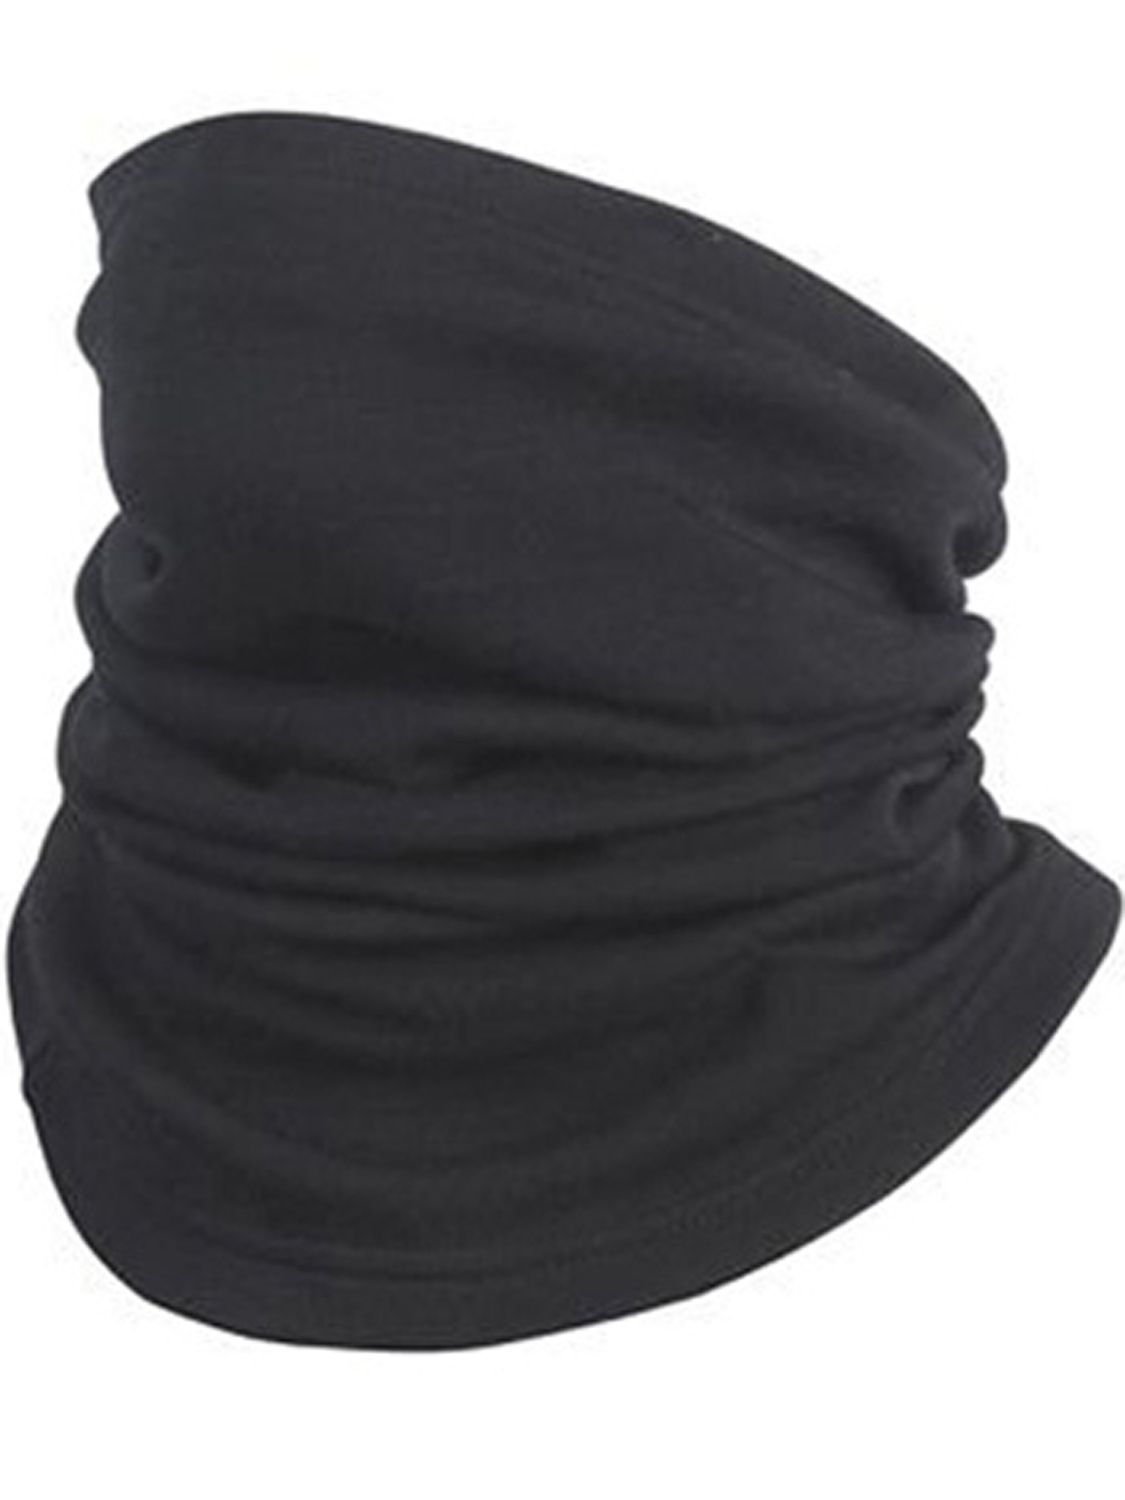 Motorcycle Bicycle Cycling Outdoor Lightweight Neck Warmer Tube Scarf Balaclava 